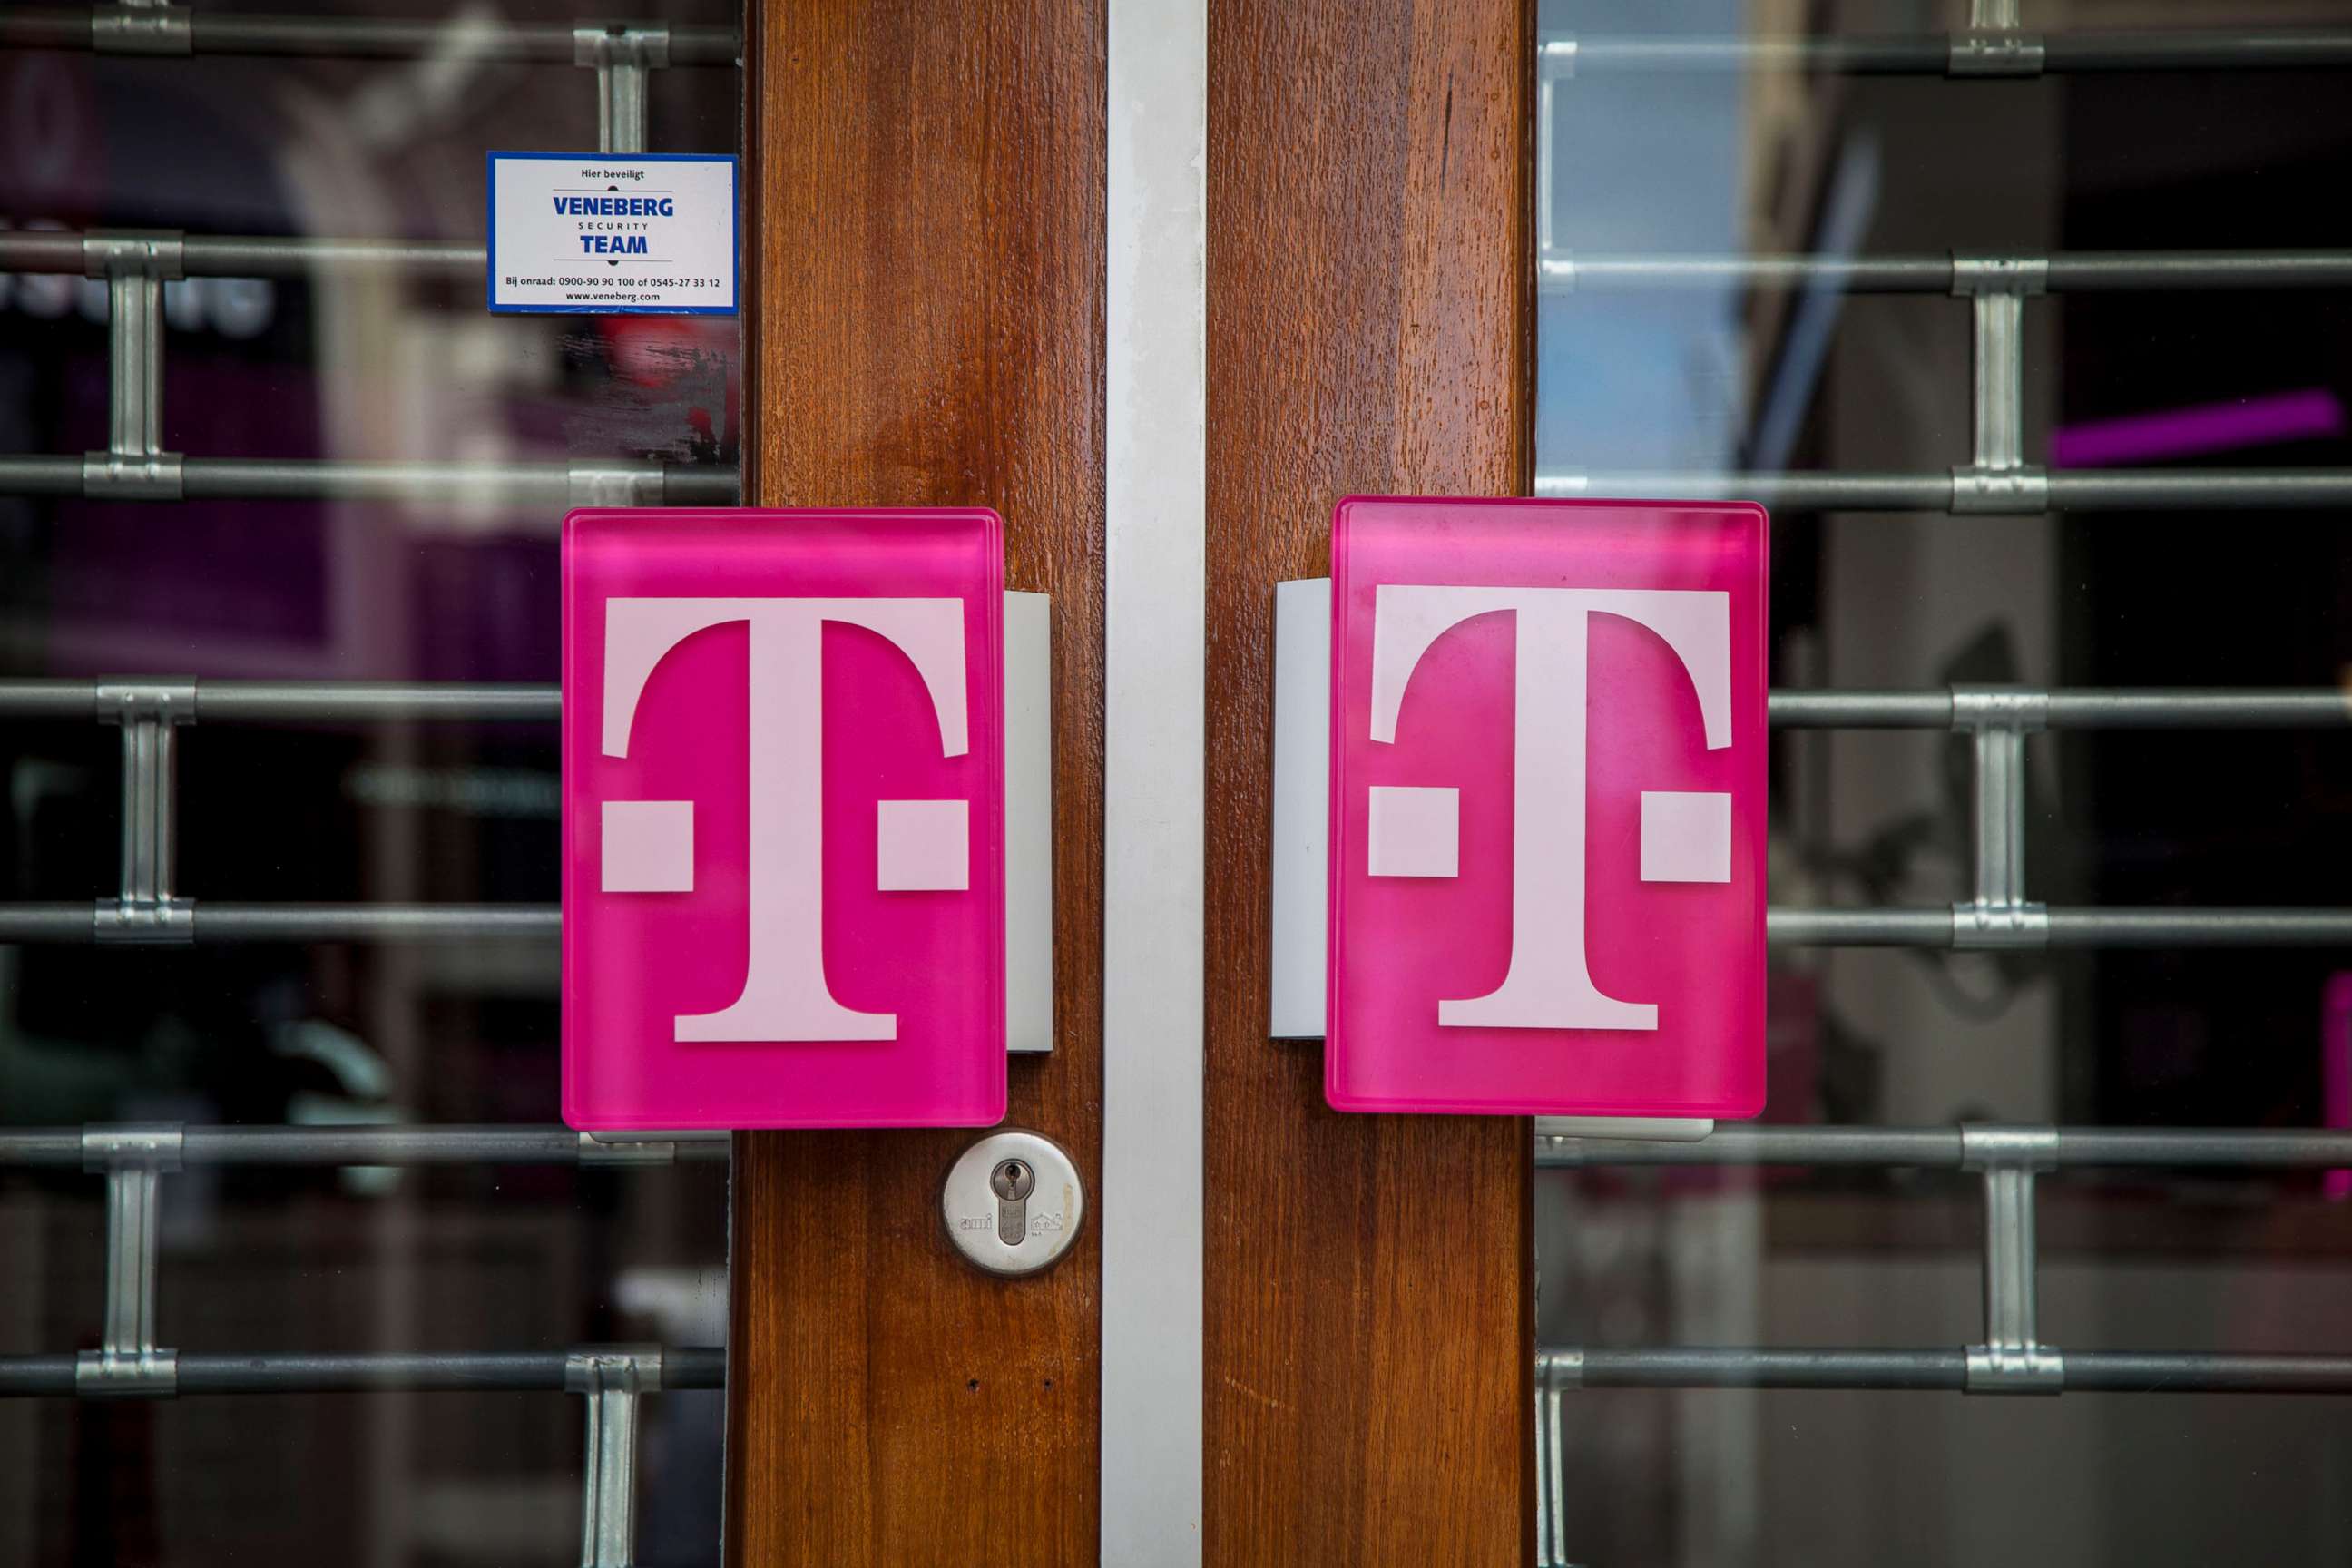 PHOTO: In this April 3, 2020 file photo storefront doors with logo of T-mobile, in Zutphen, Netherlands. 